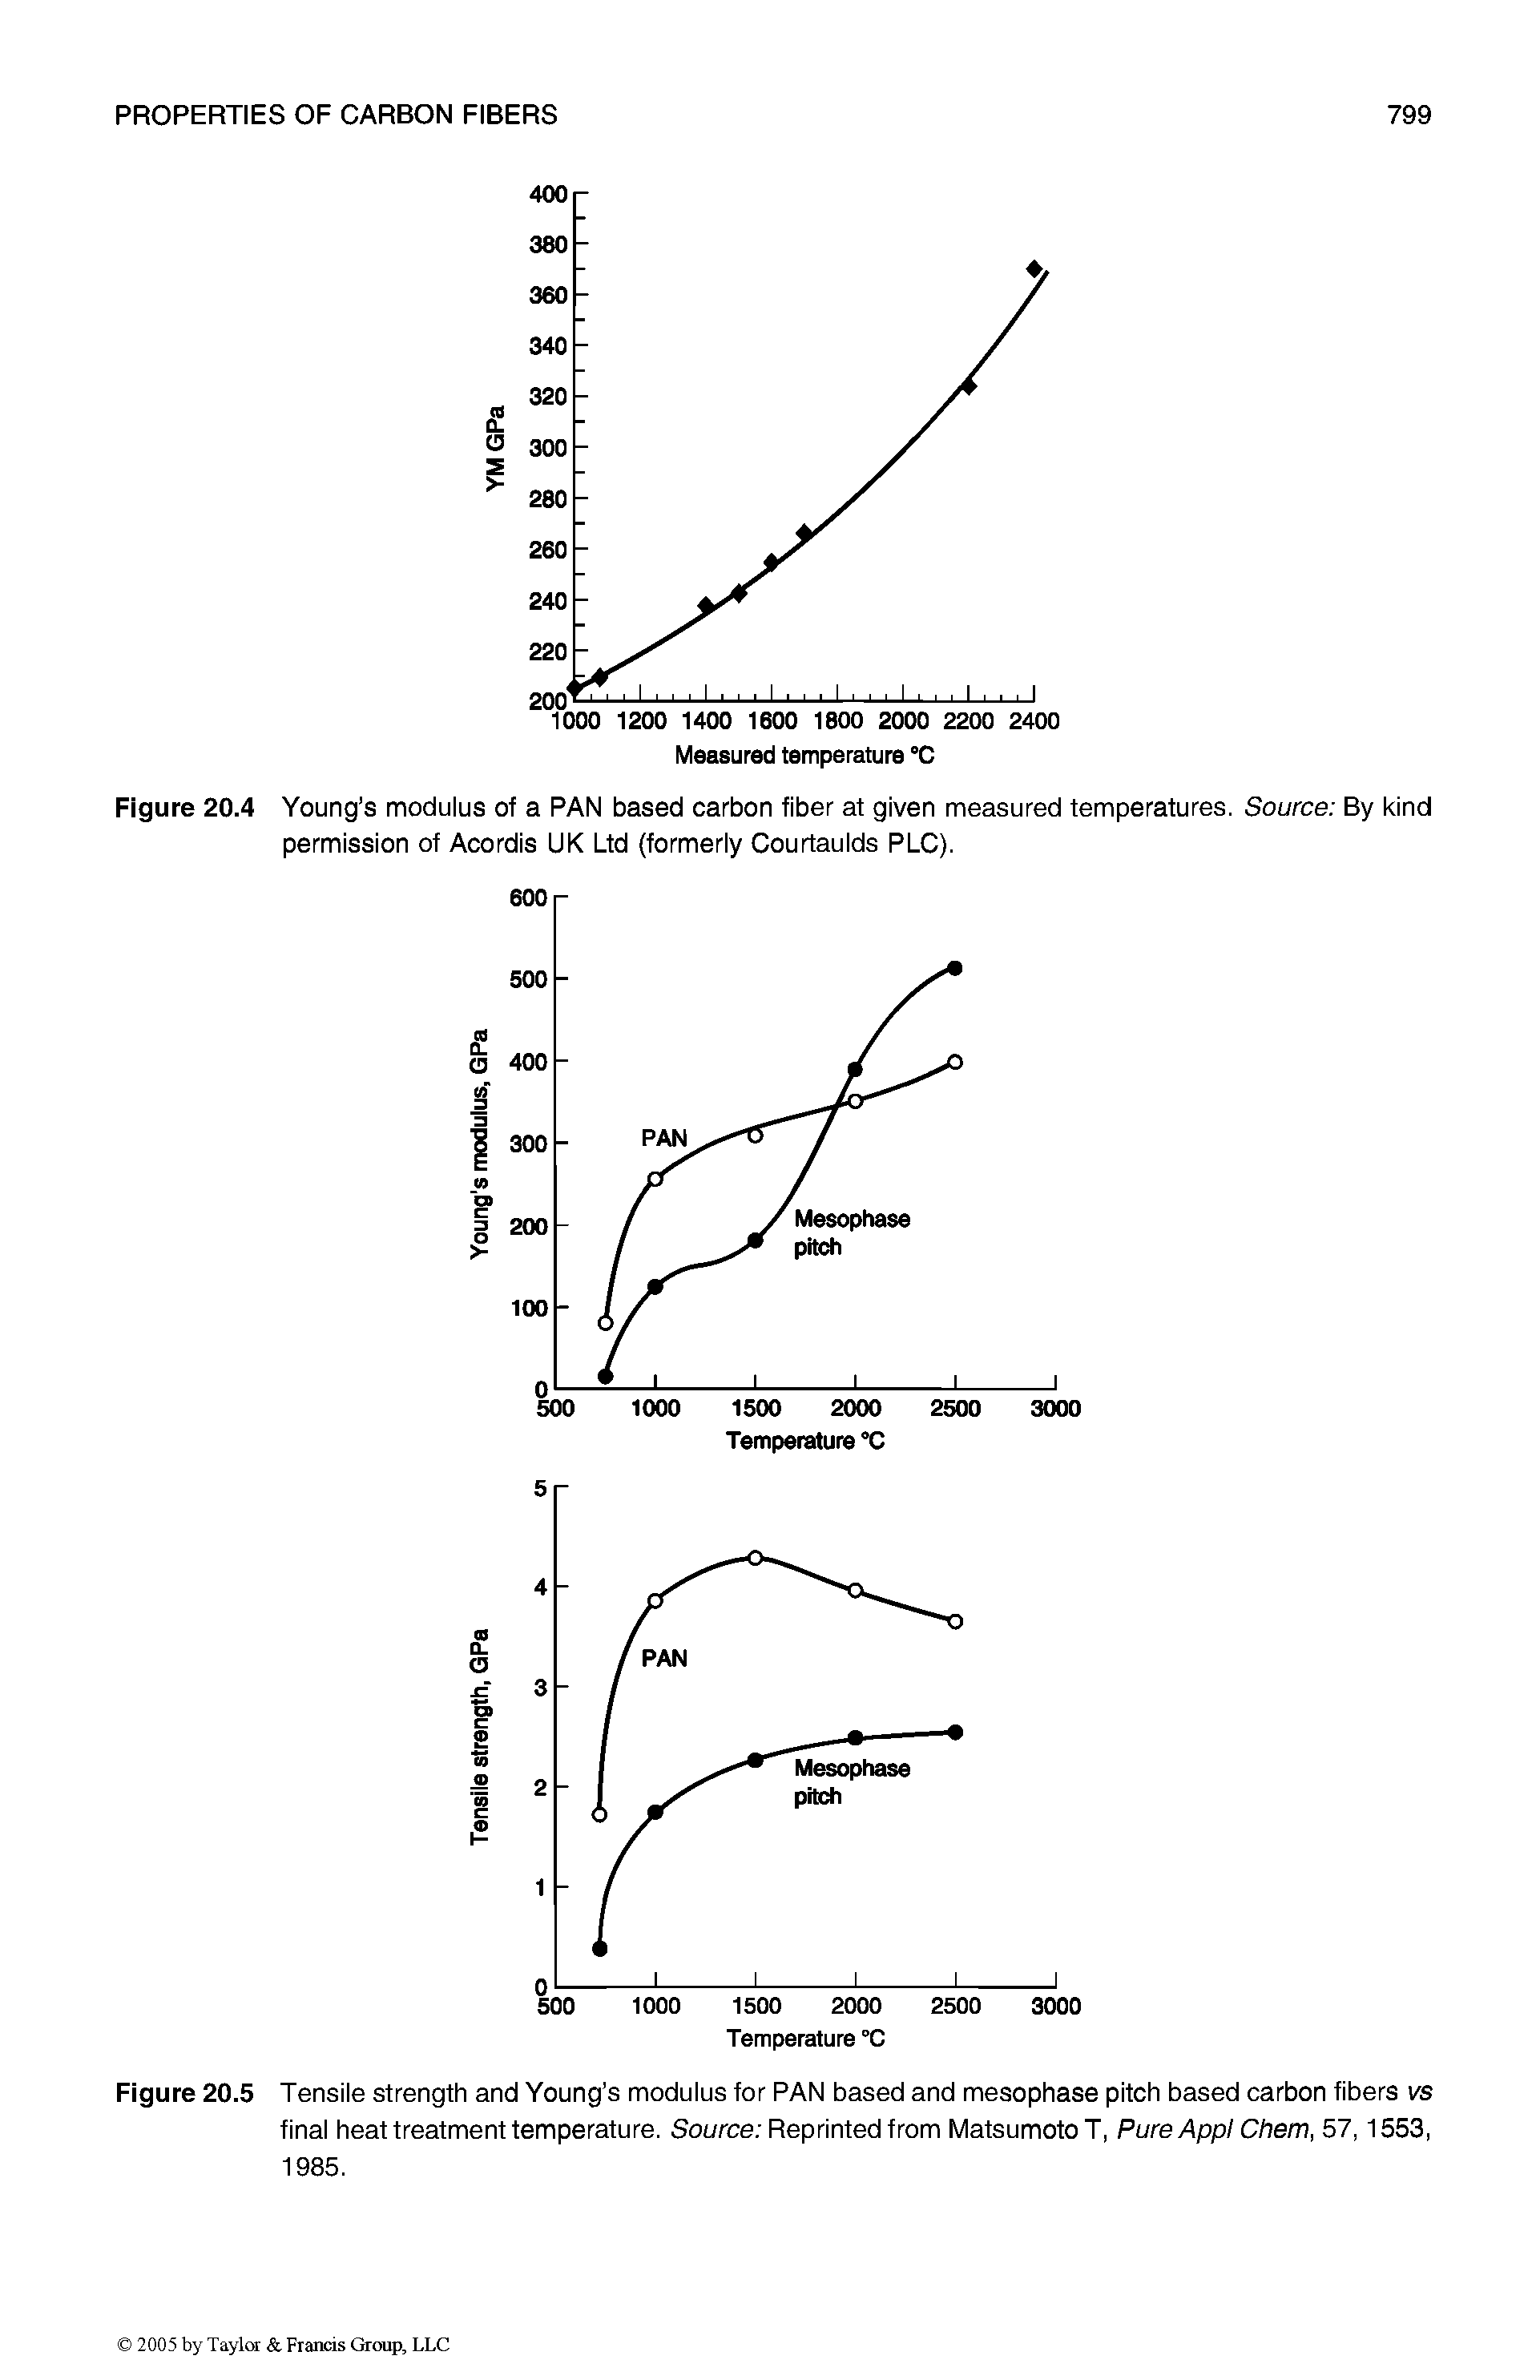 Figure 20.5 Tensile strength and Young s modulus for PAN based and mesophase pitch based carbon fibers vs final heat treatment temperature. Source Reprinted from MatsumotoT, PureAppI Chem, 57,1553, 1985.